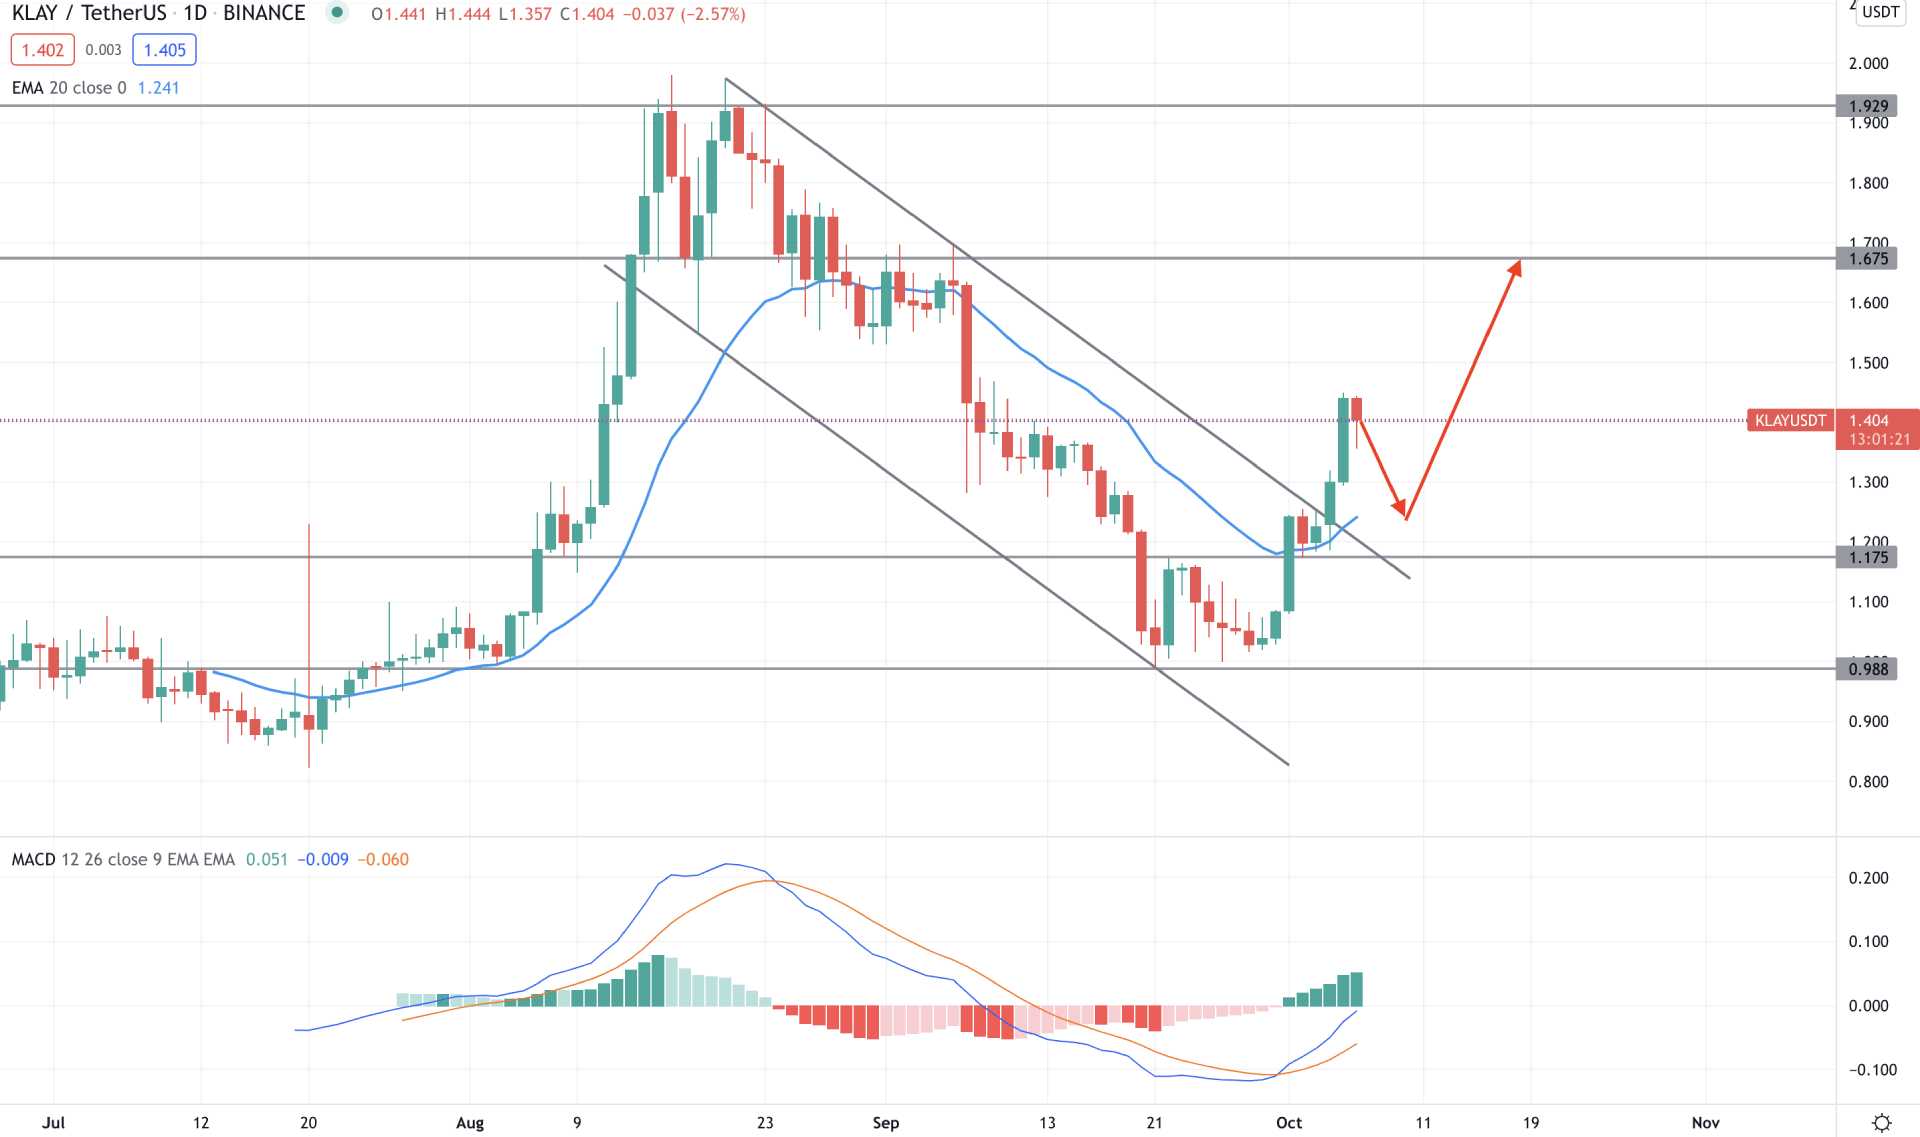 KLAY/USDT Daily Technical Analysis 6 October 2021